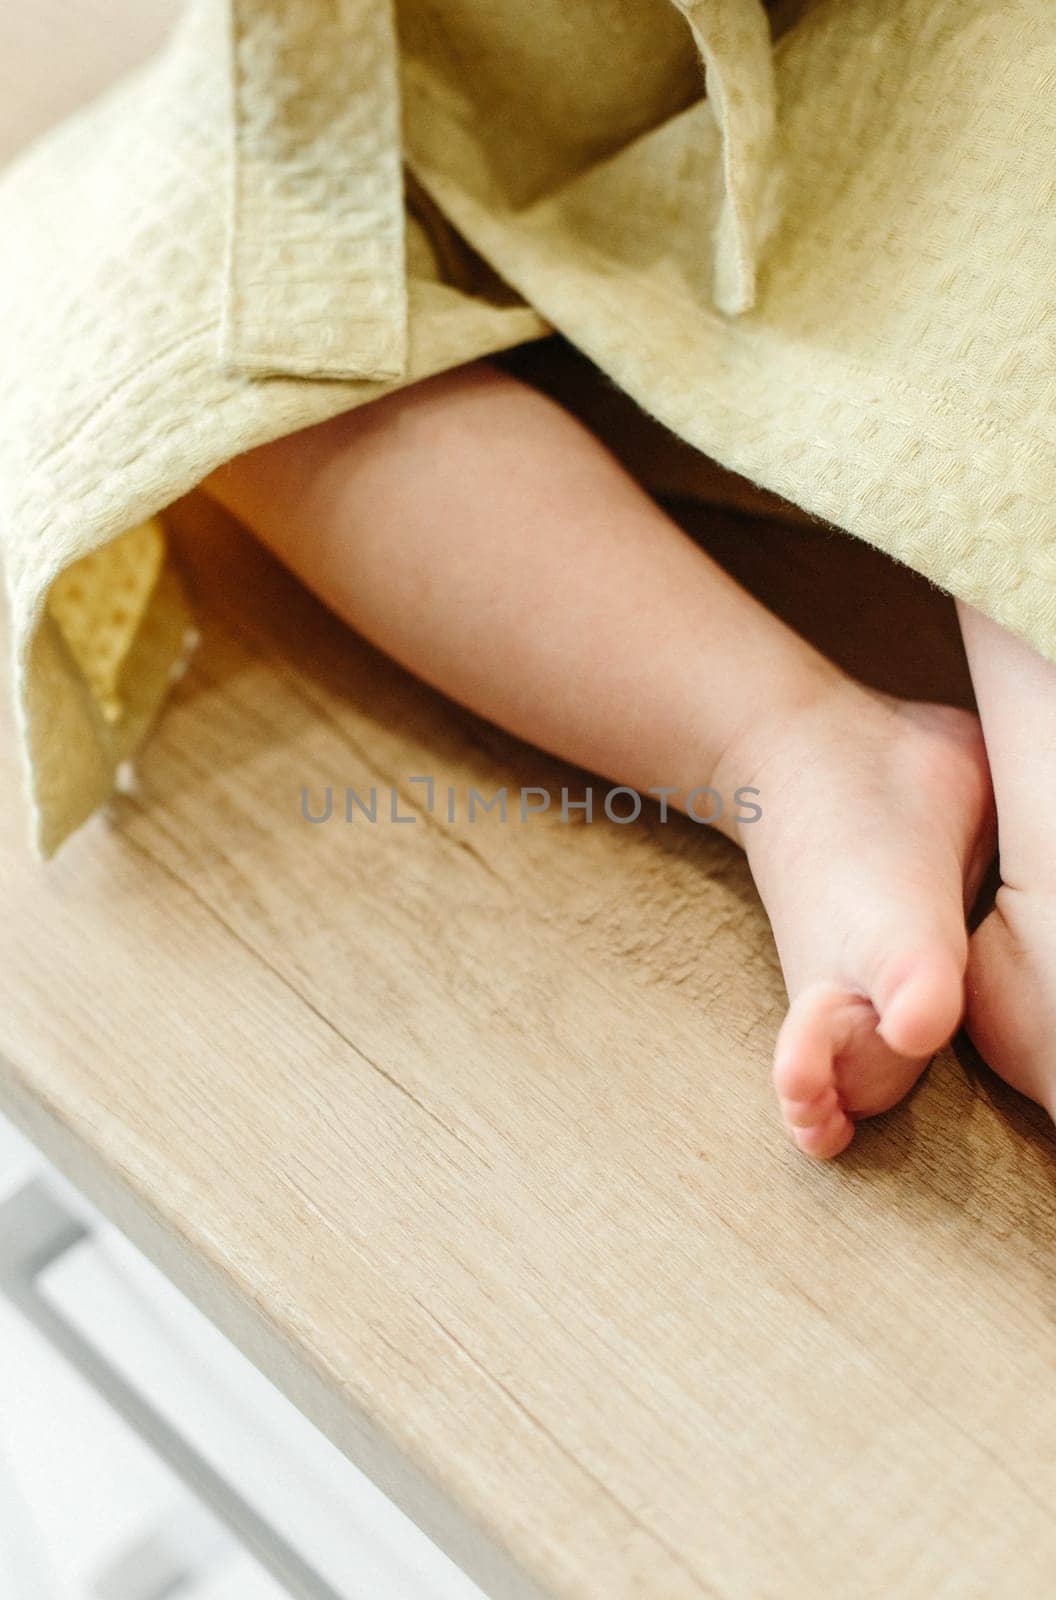 The child sits on the windowsill in a dressing gown, close-up of the legs by Sd28DimoN_1976